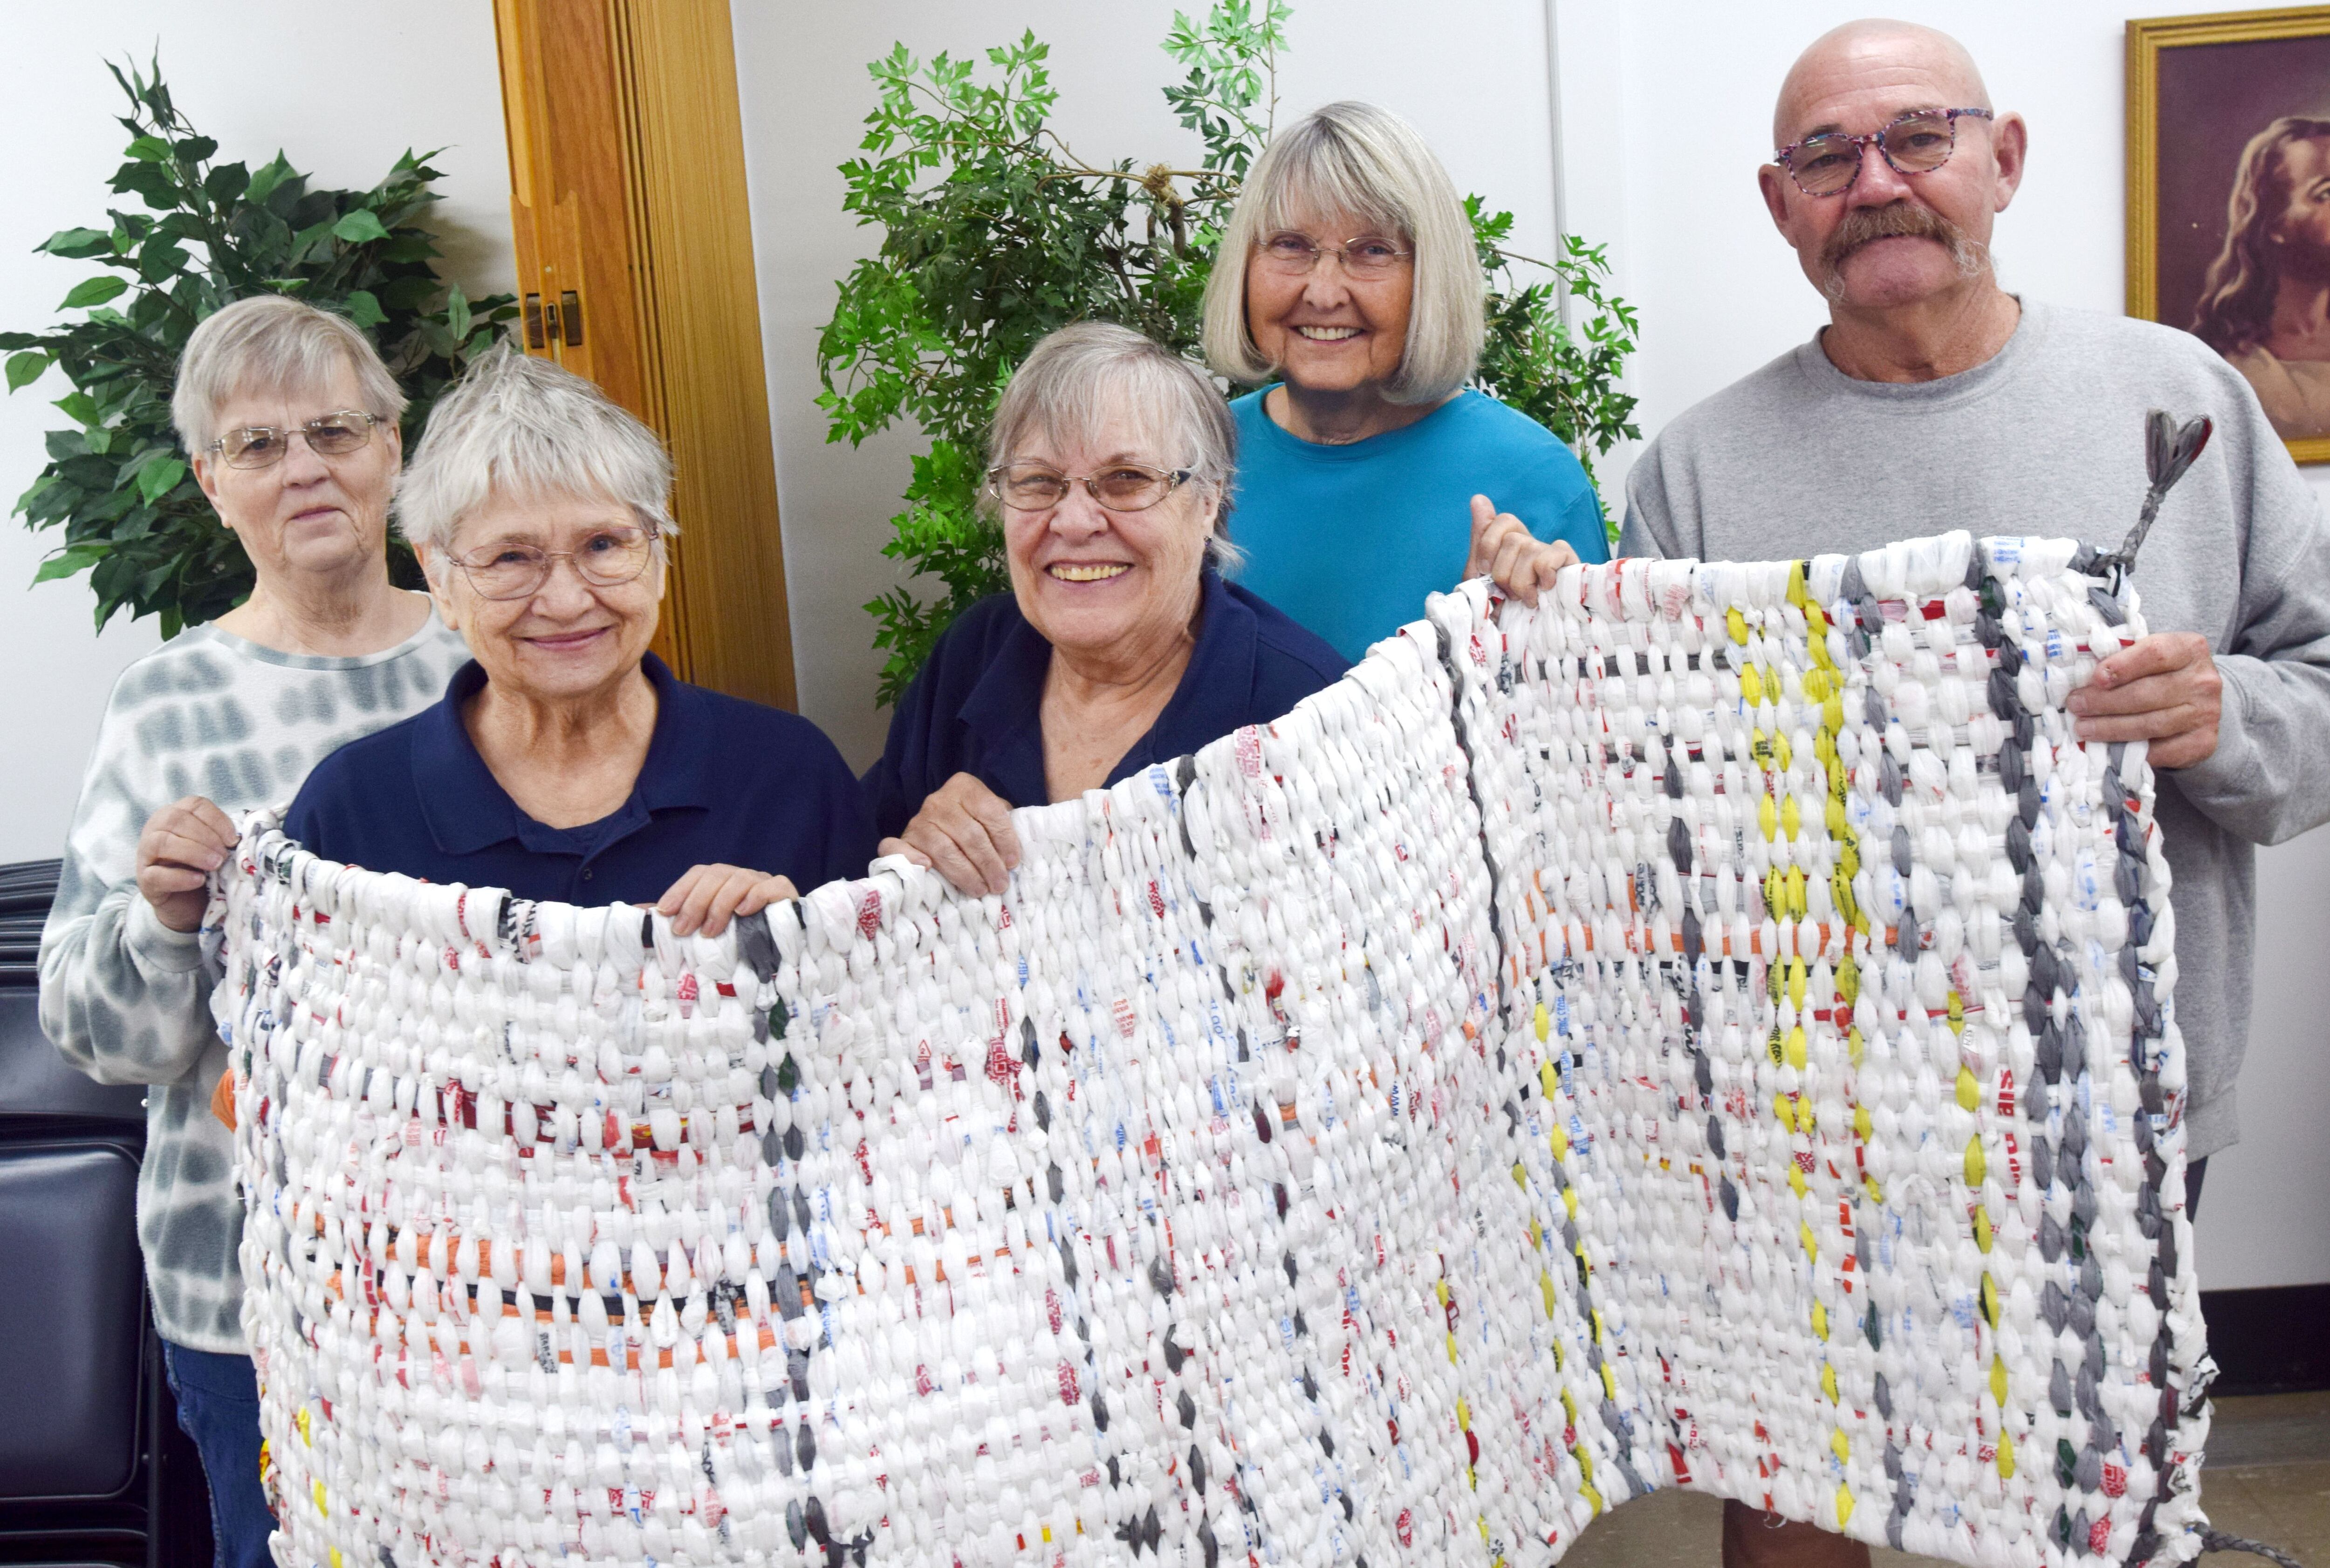 Newton community members create sleeping mats out of plastic grocery bags